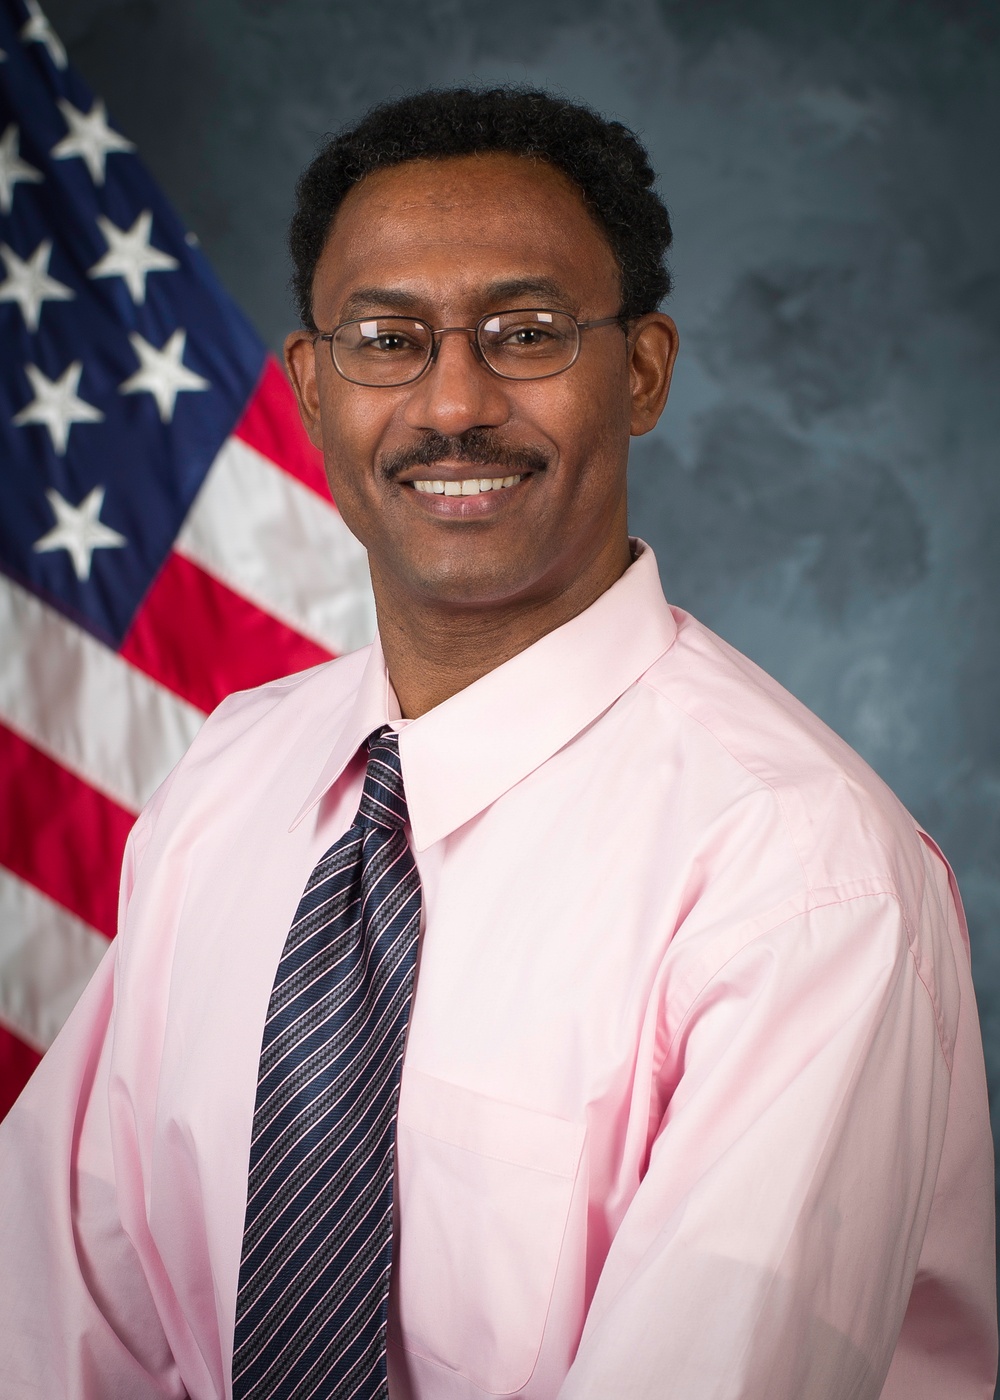 Official portrait, Rodney T. Russell, US Department of the Air Force